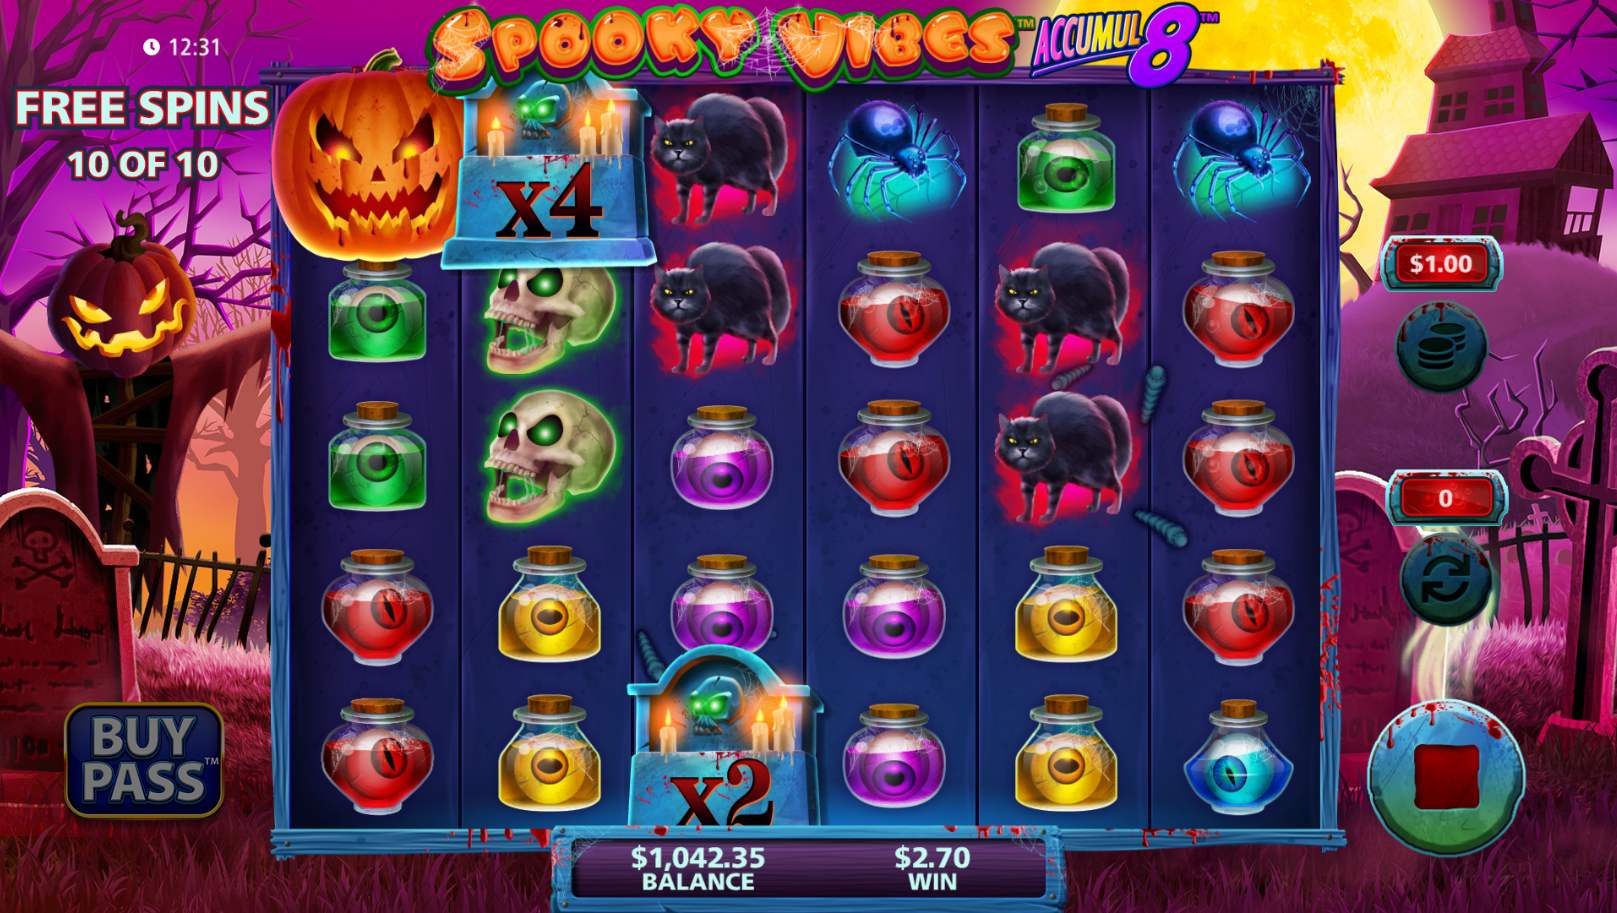 Spooky Vibes Accumul8 Free Spins